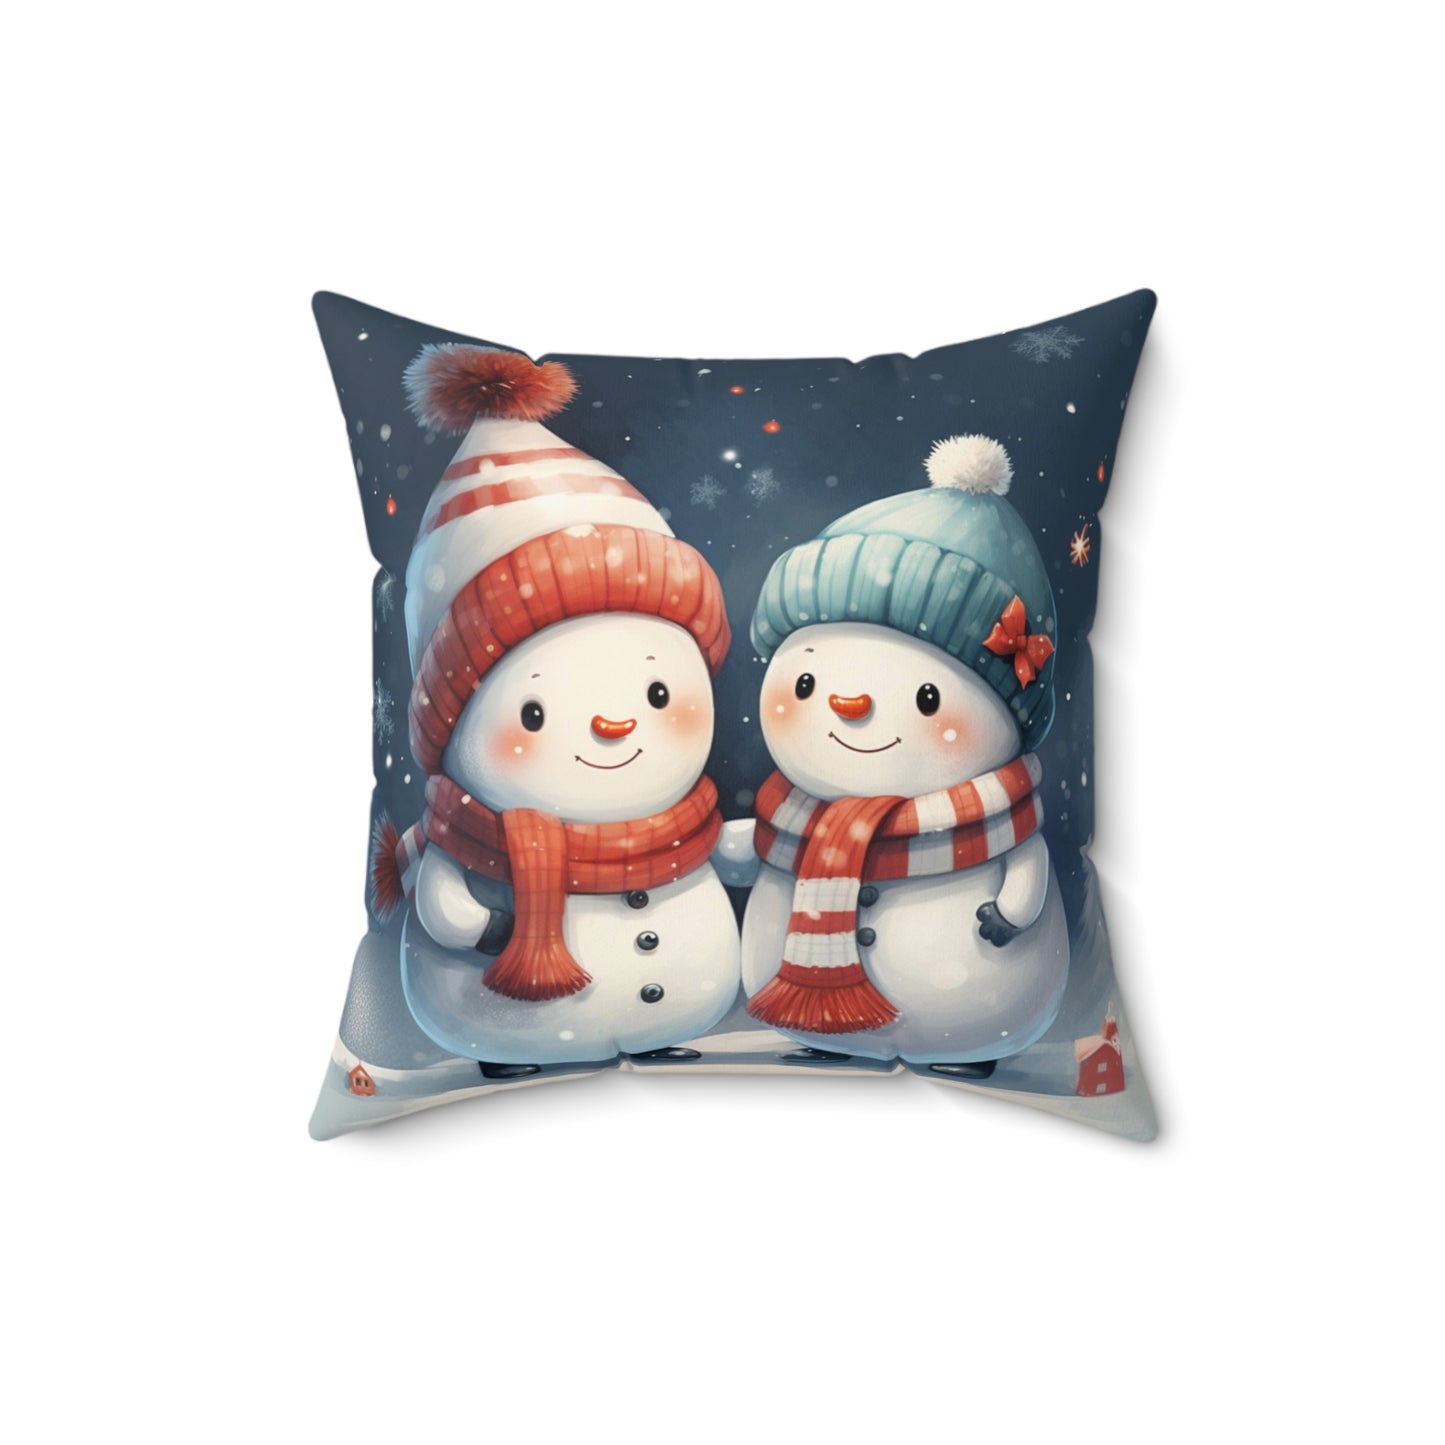 Snowman Couple Filled Pillow with Insert, Cute Christmas Xmas Square Throw Accent Decorative Room Decor Floor Sofa Couch Cushion Starcove Fashion